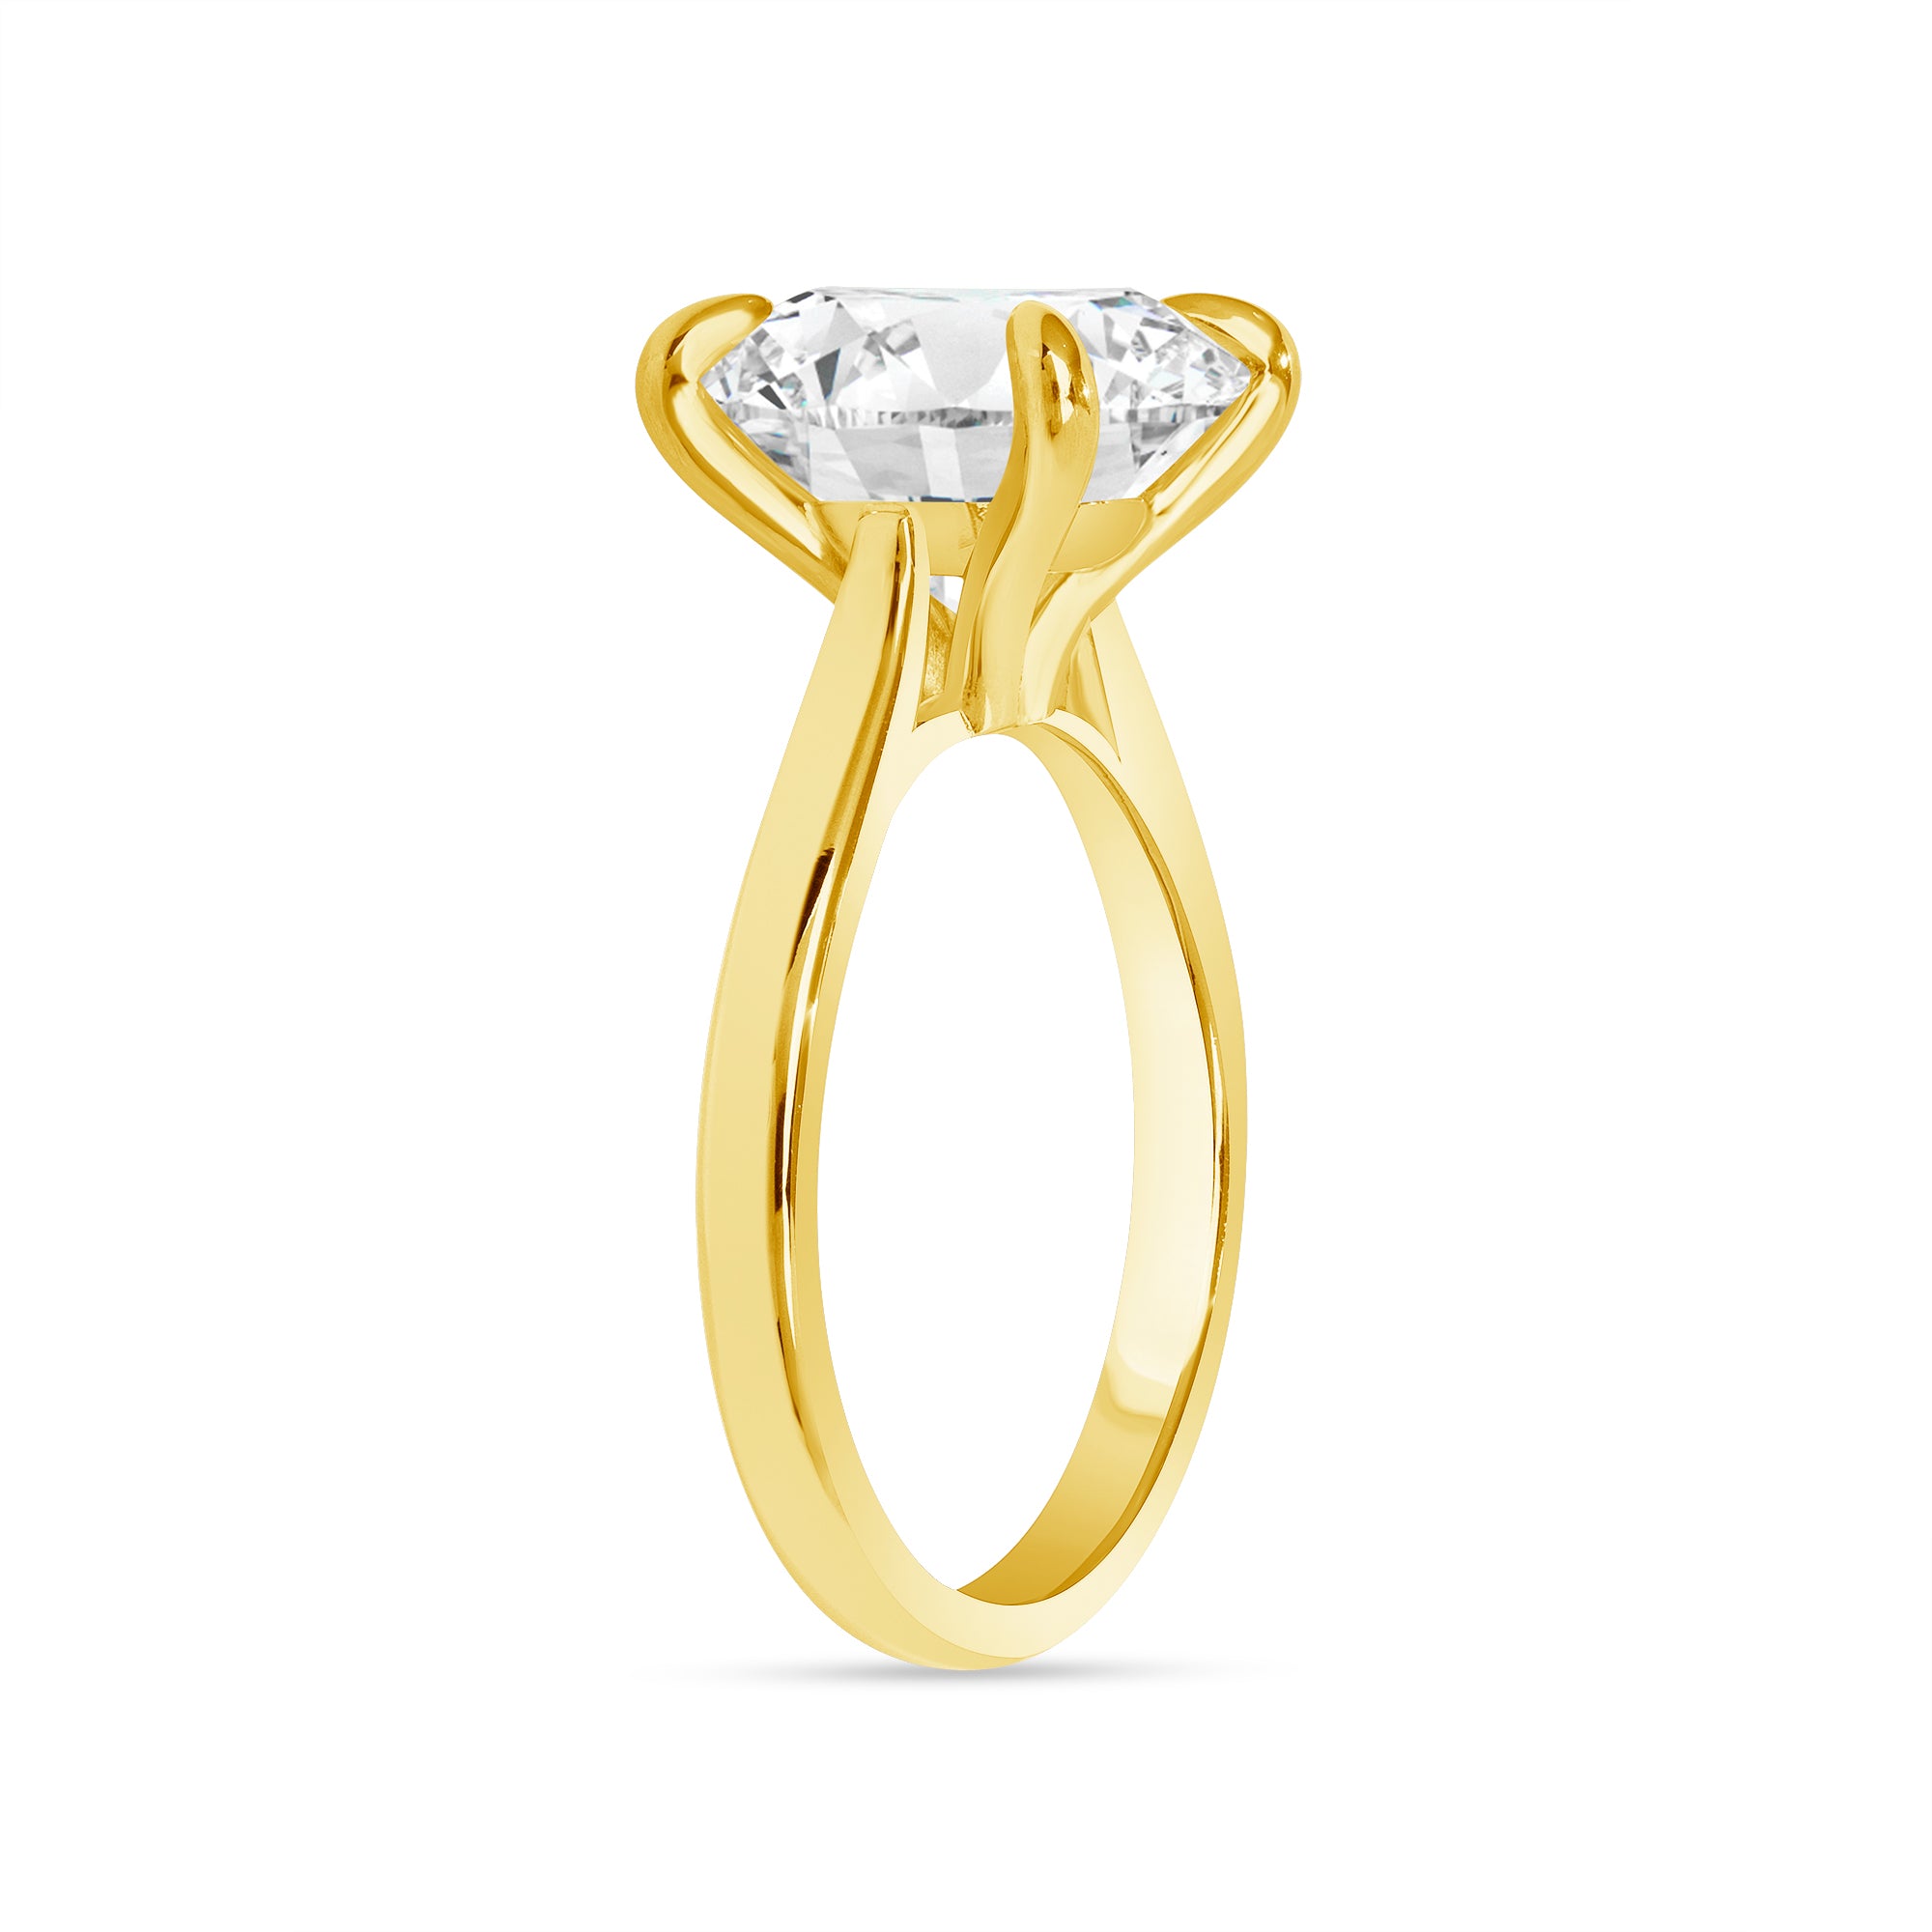 5.2ct Round Brilliant Cut Diamond Solitaire Ring in 18k Yellow Gold Band, GIA Certified